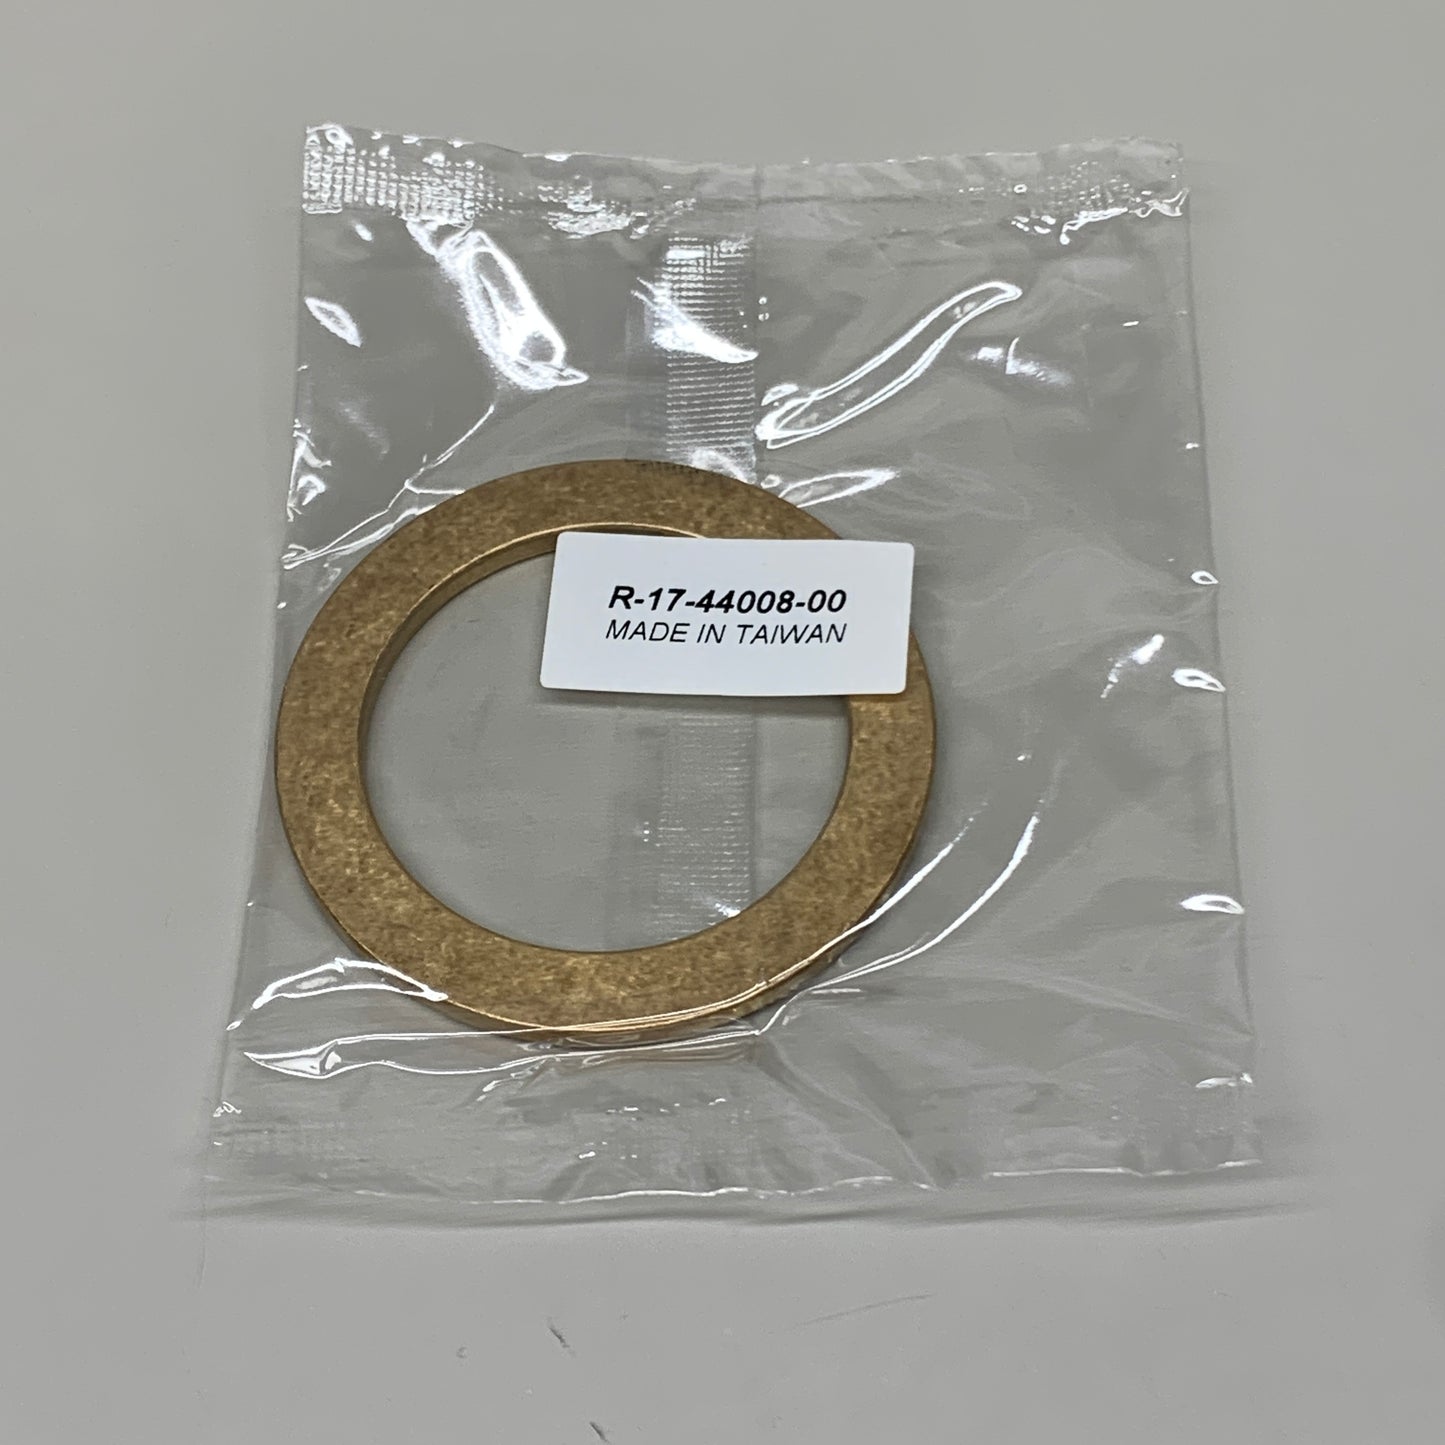 10 pk THUST WASHER Seal end Compressor Part R-17-44008-00